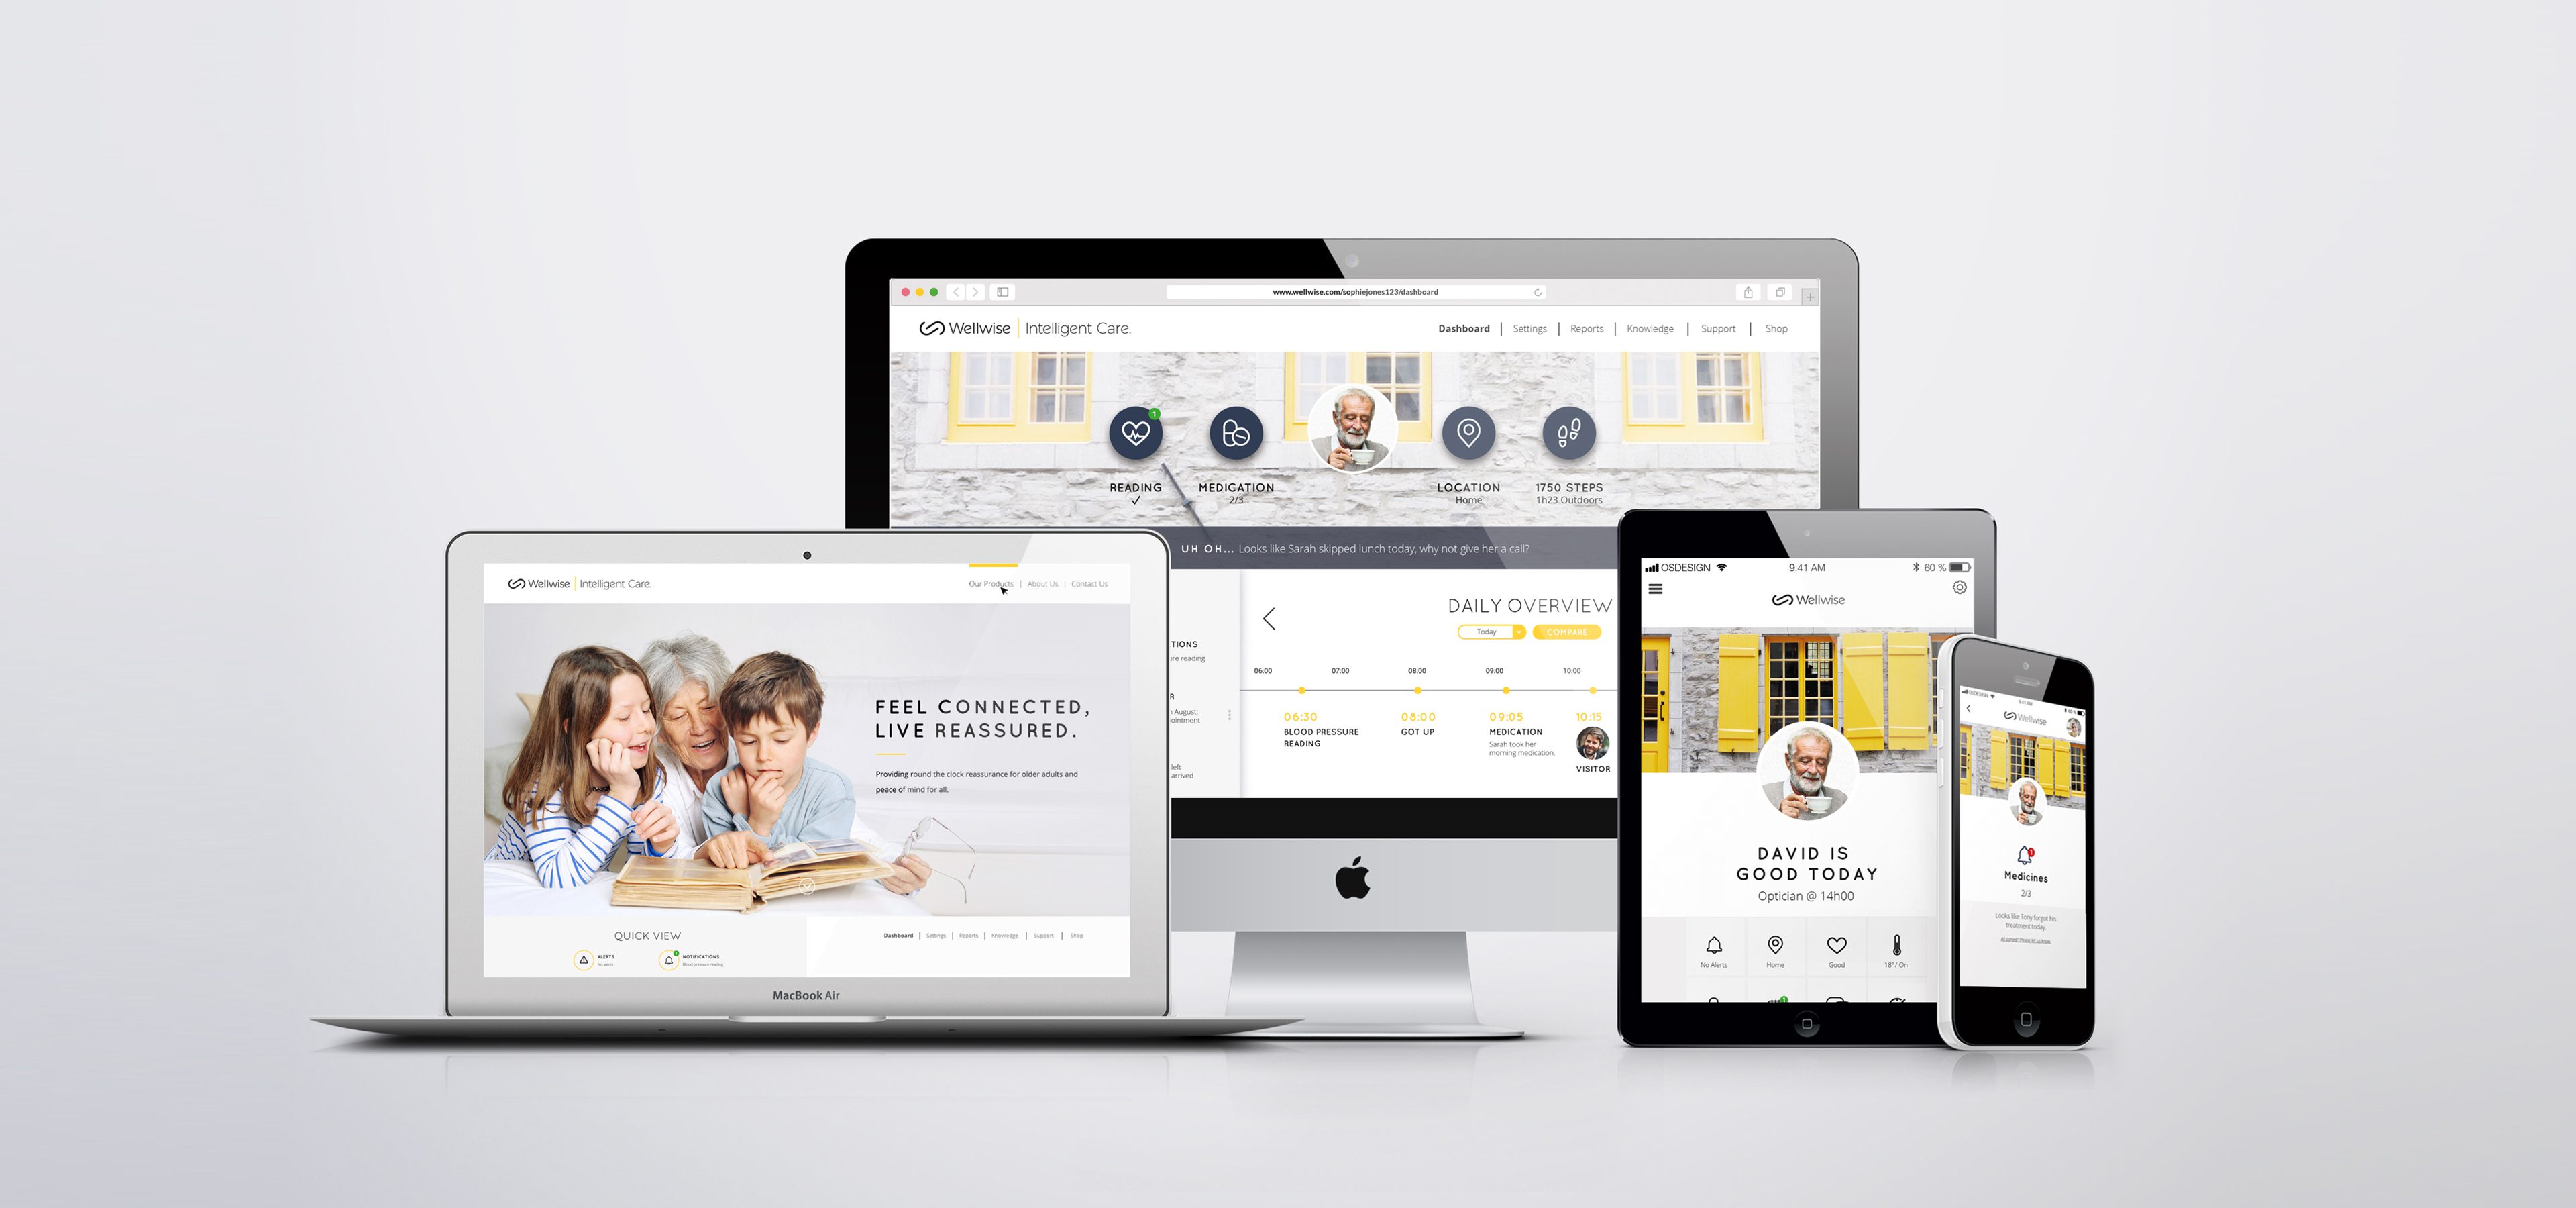 Creating a brand identity for modern ageing. The Wellwise dashboard created by Rodd